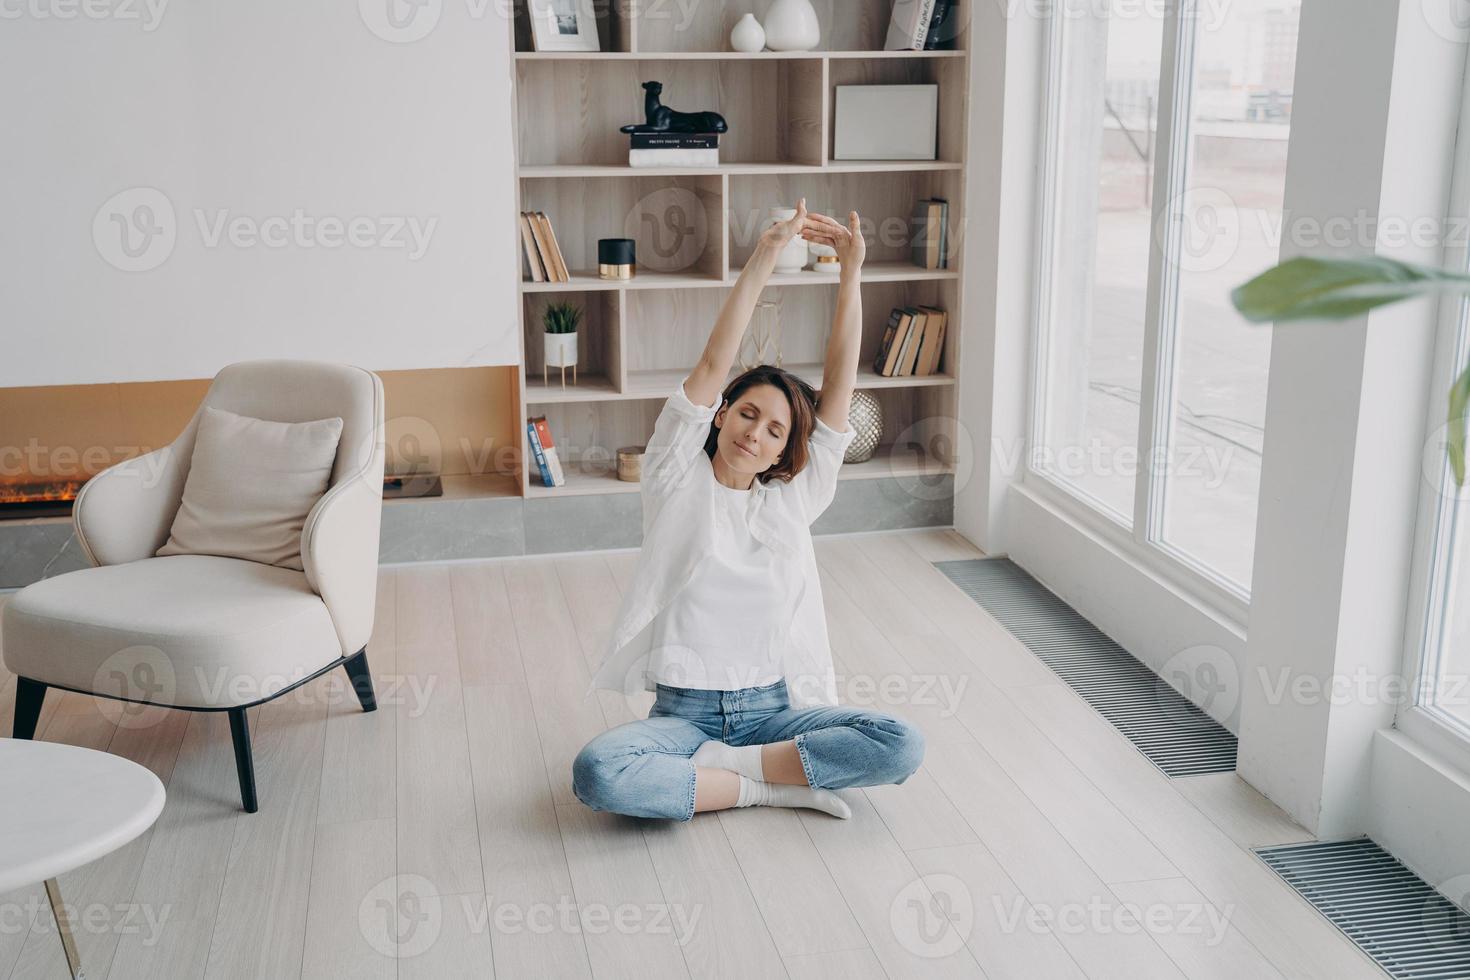 Female practicing yoga on floor in living room, stretching arms up. Healthy lifestyle, wellness photo